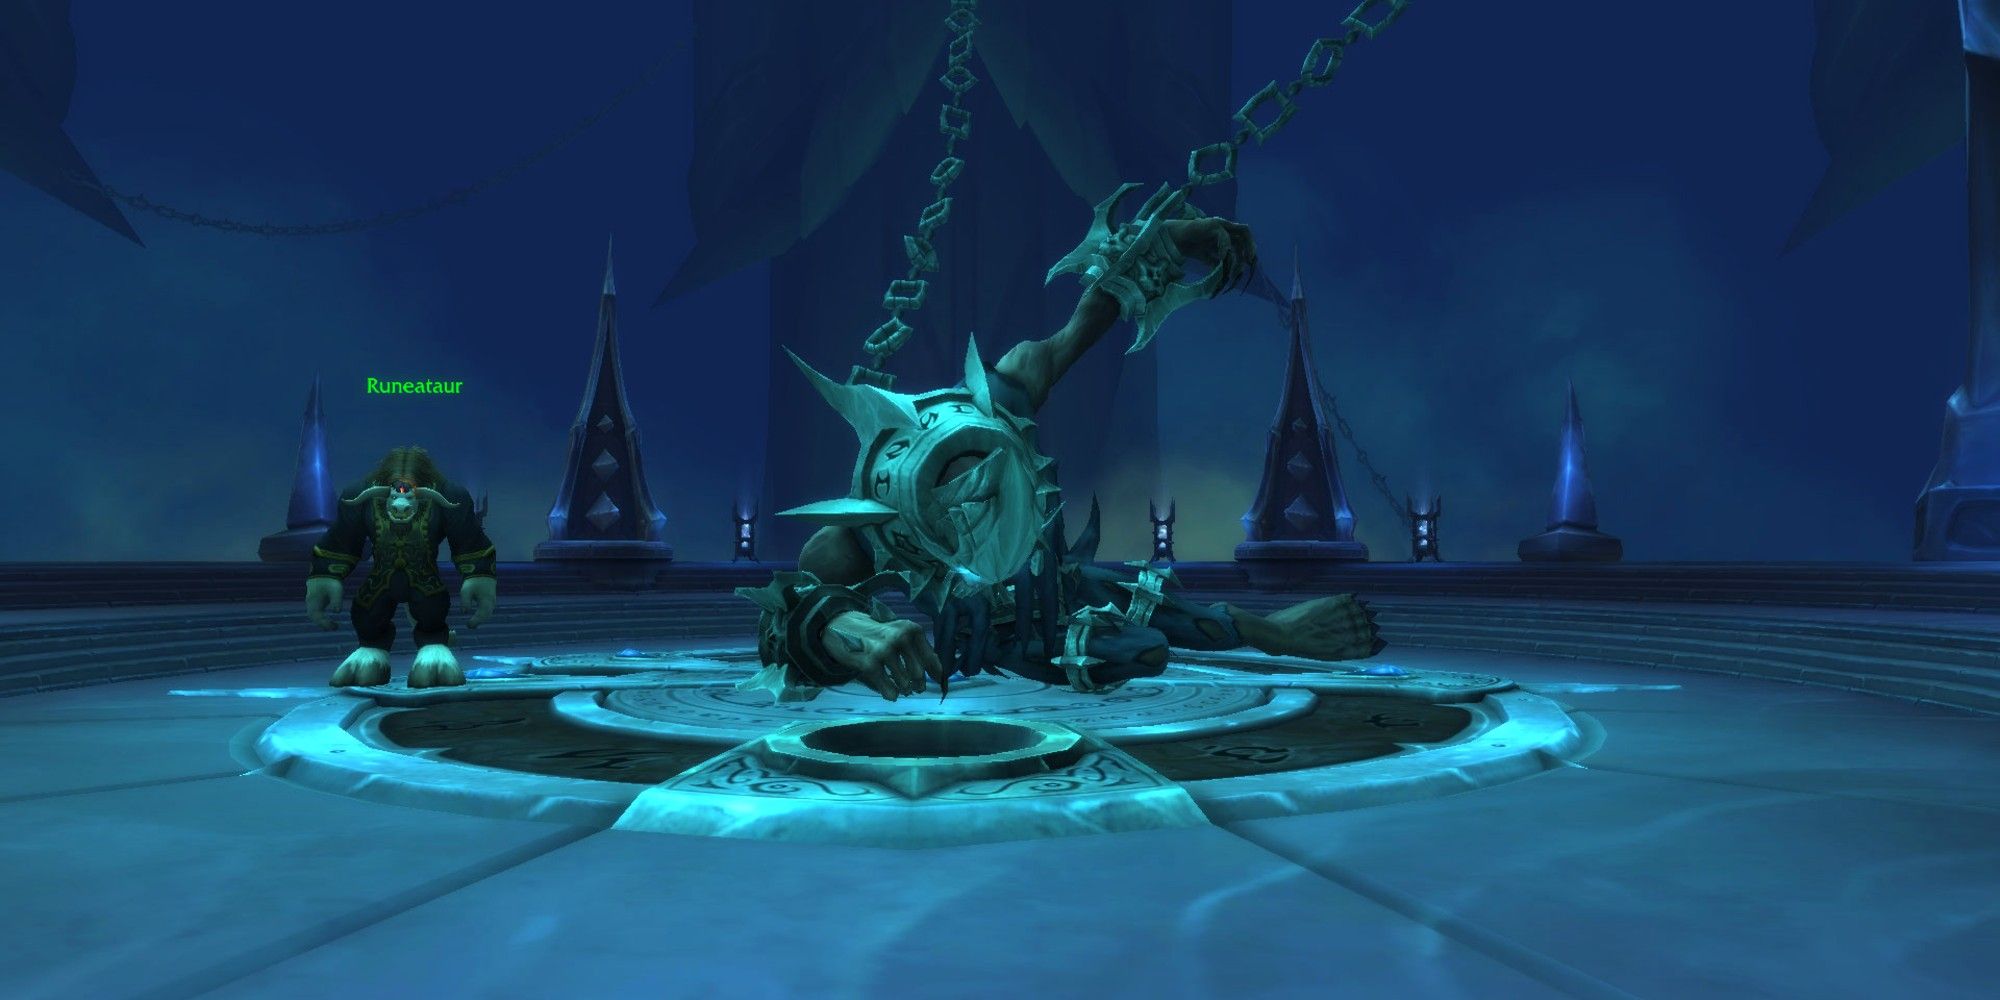 The Runecarver can be found in Torghast in The Maw in World of Warcraft: Shadowlands